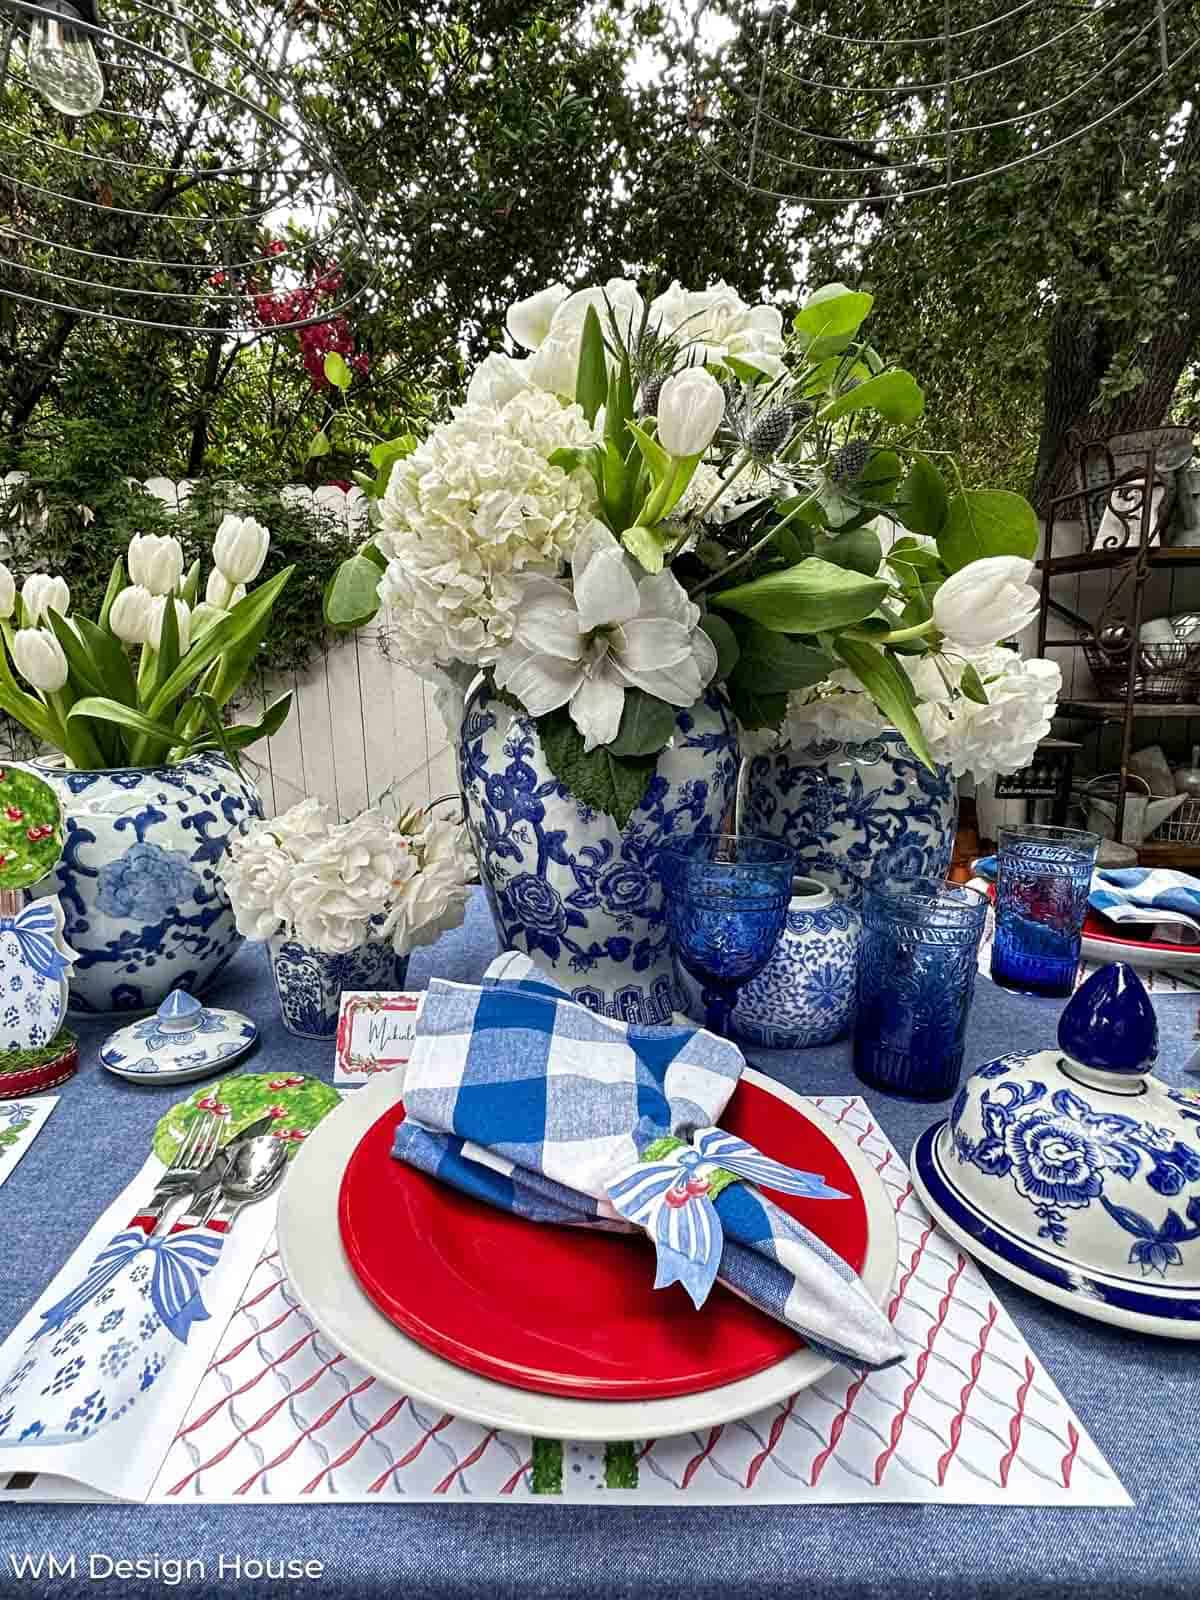 4th of July table setting with red and white plates, blue plaid napkins, and a white floral centerpiece in a blue and white vase